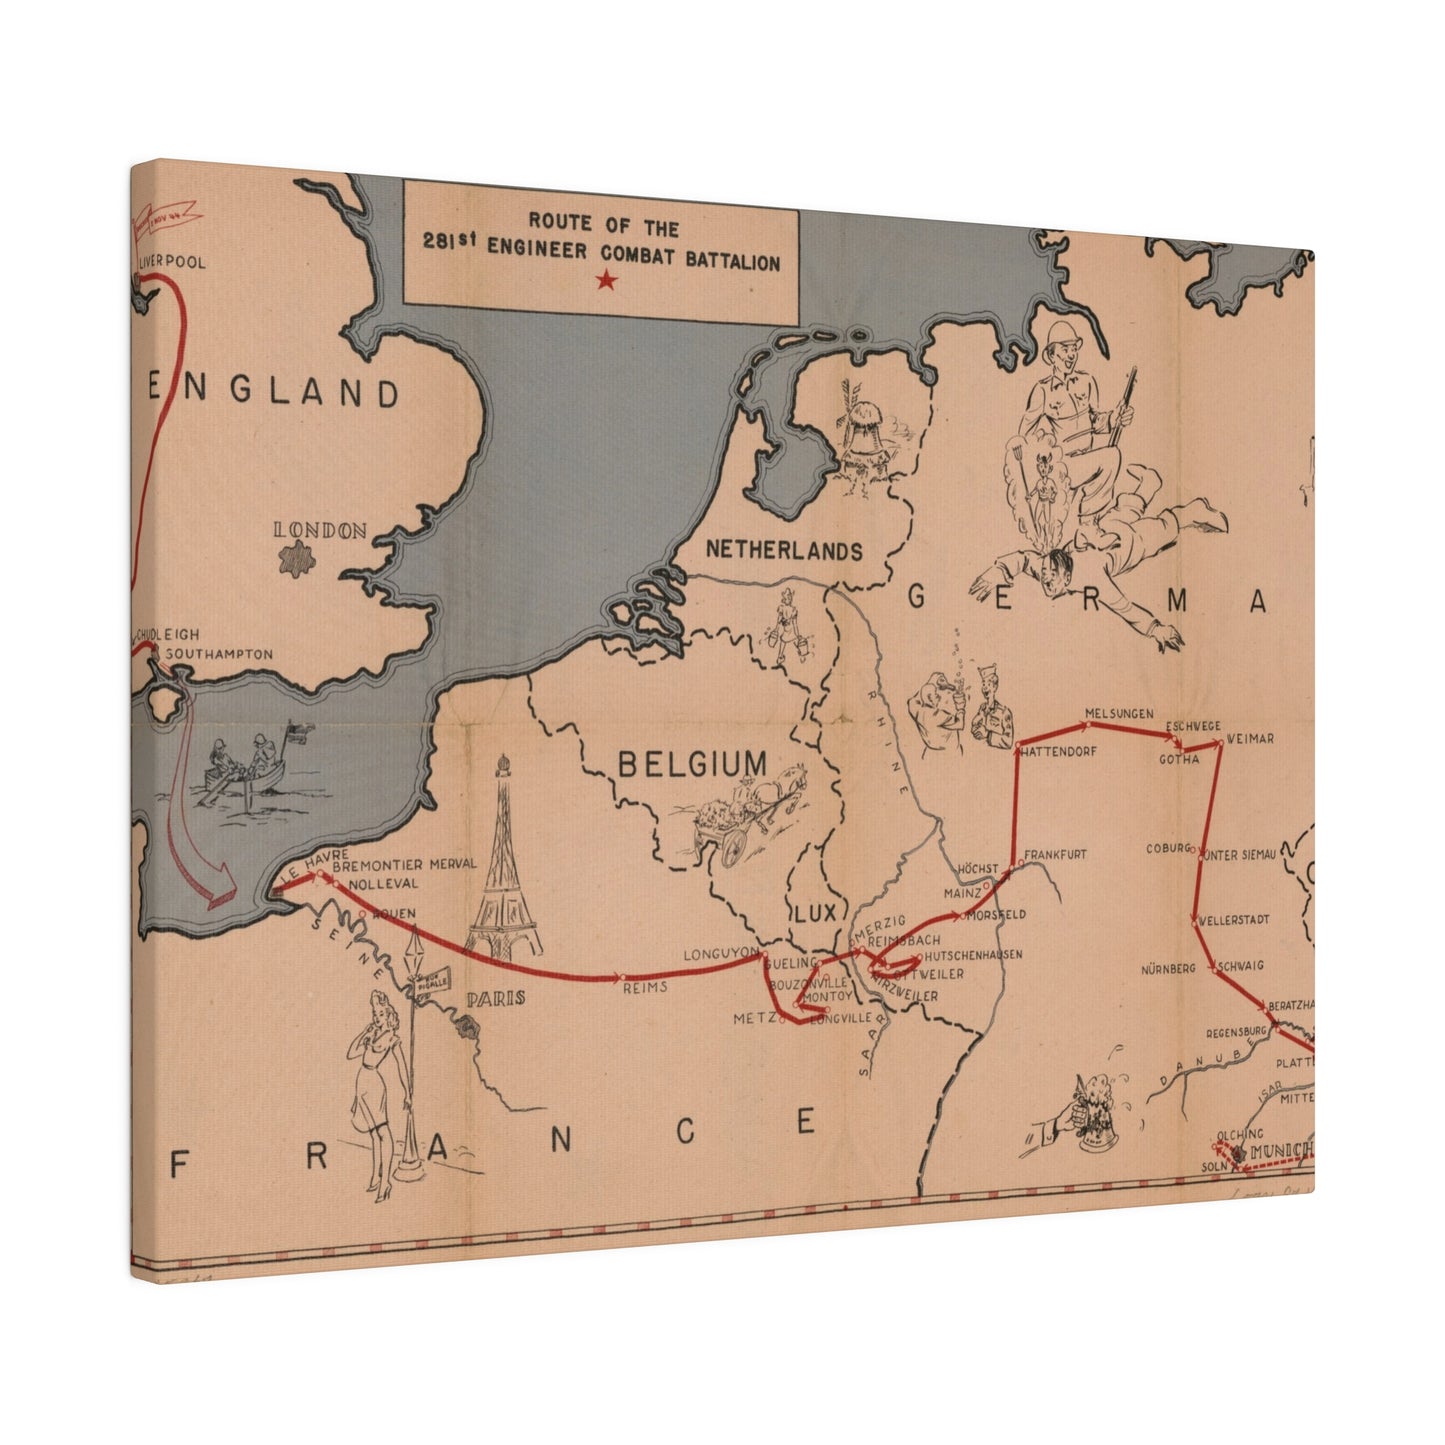 Route of the 281st Engineer Combat Battalion 3 November 1944 to 8 May 1945